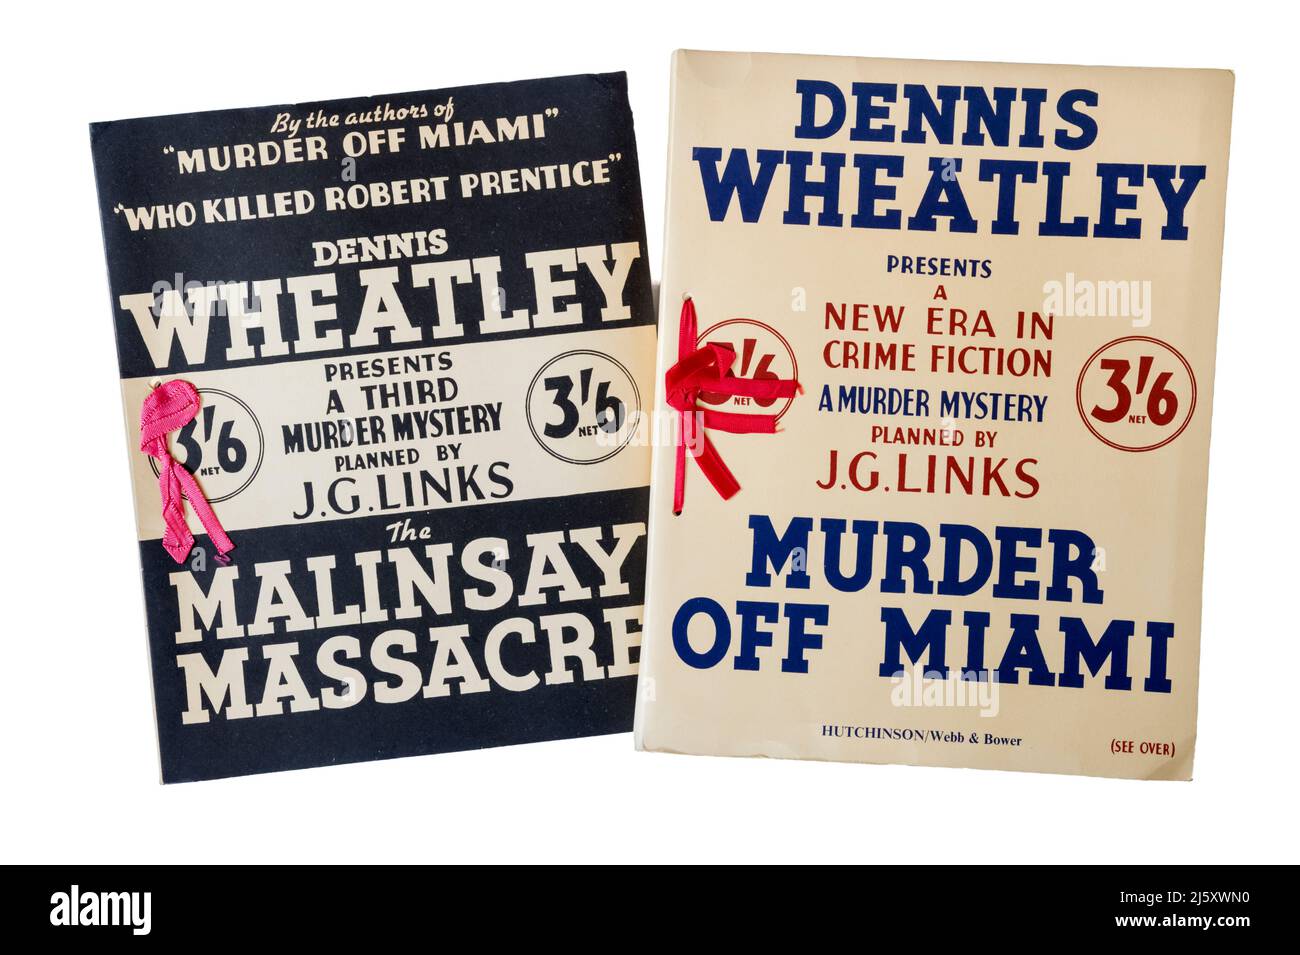 The Malinsay Massacre & Muder Off Miami by Dennis Wheatley presented as loose-leaf crime dossiers or case files complete with notes and evidence. Stock Photo